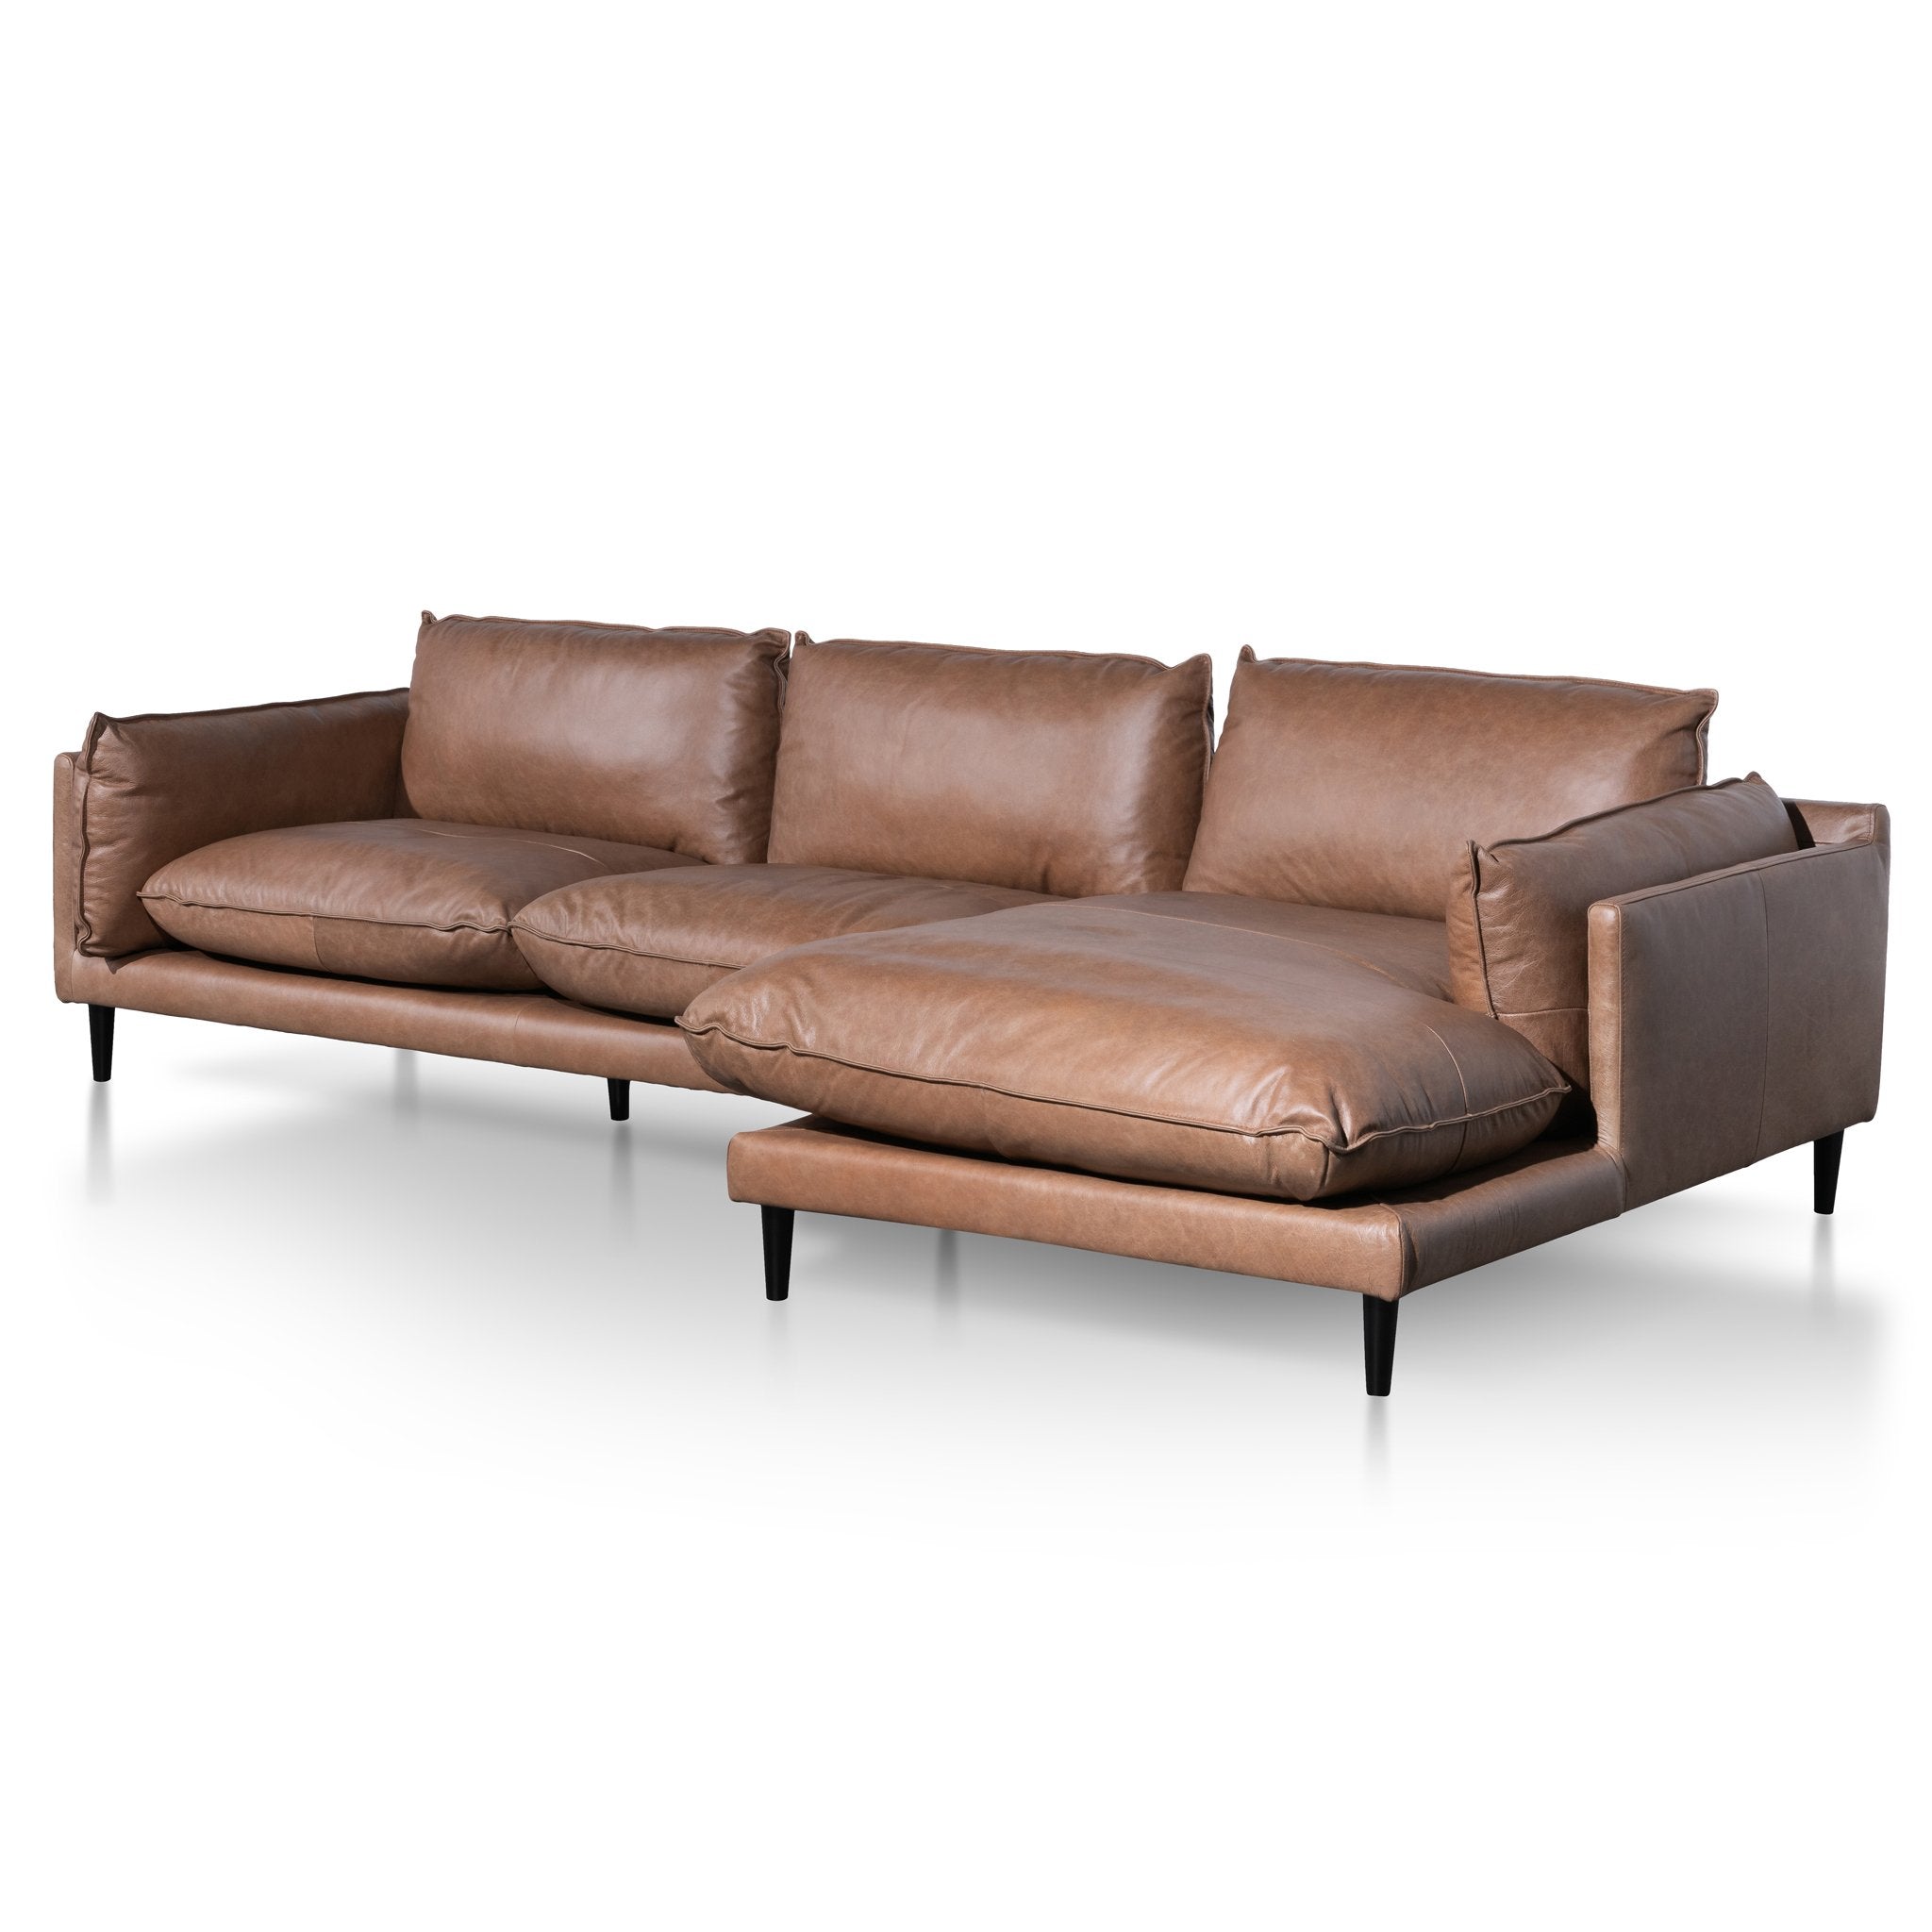 Sophia 4 Seater Right Chaise Leather Sofa - Saddle Brown